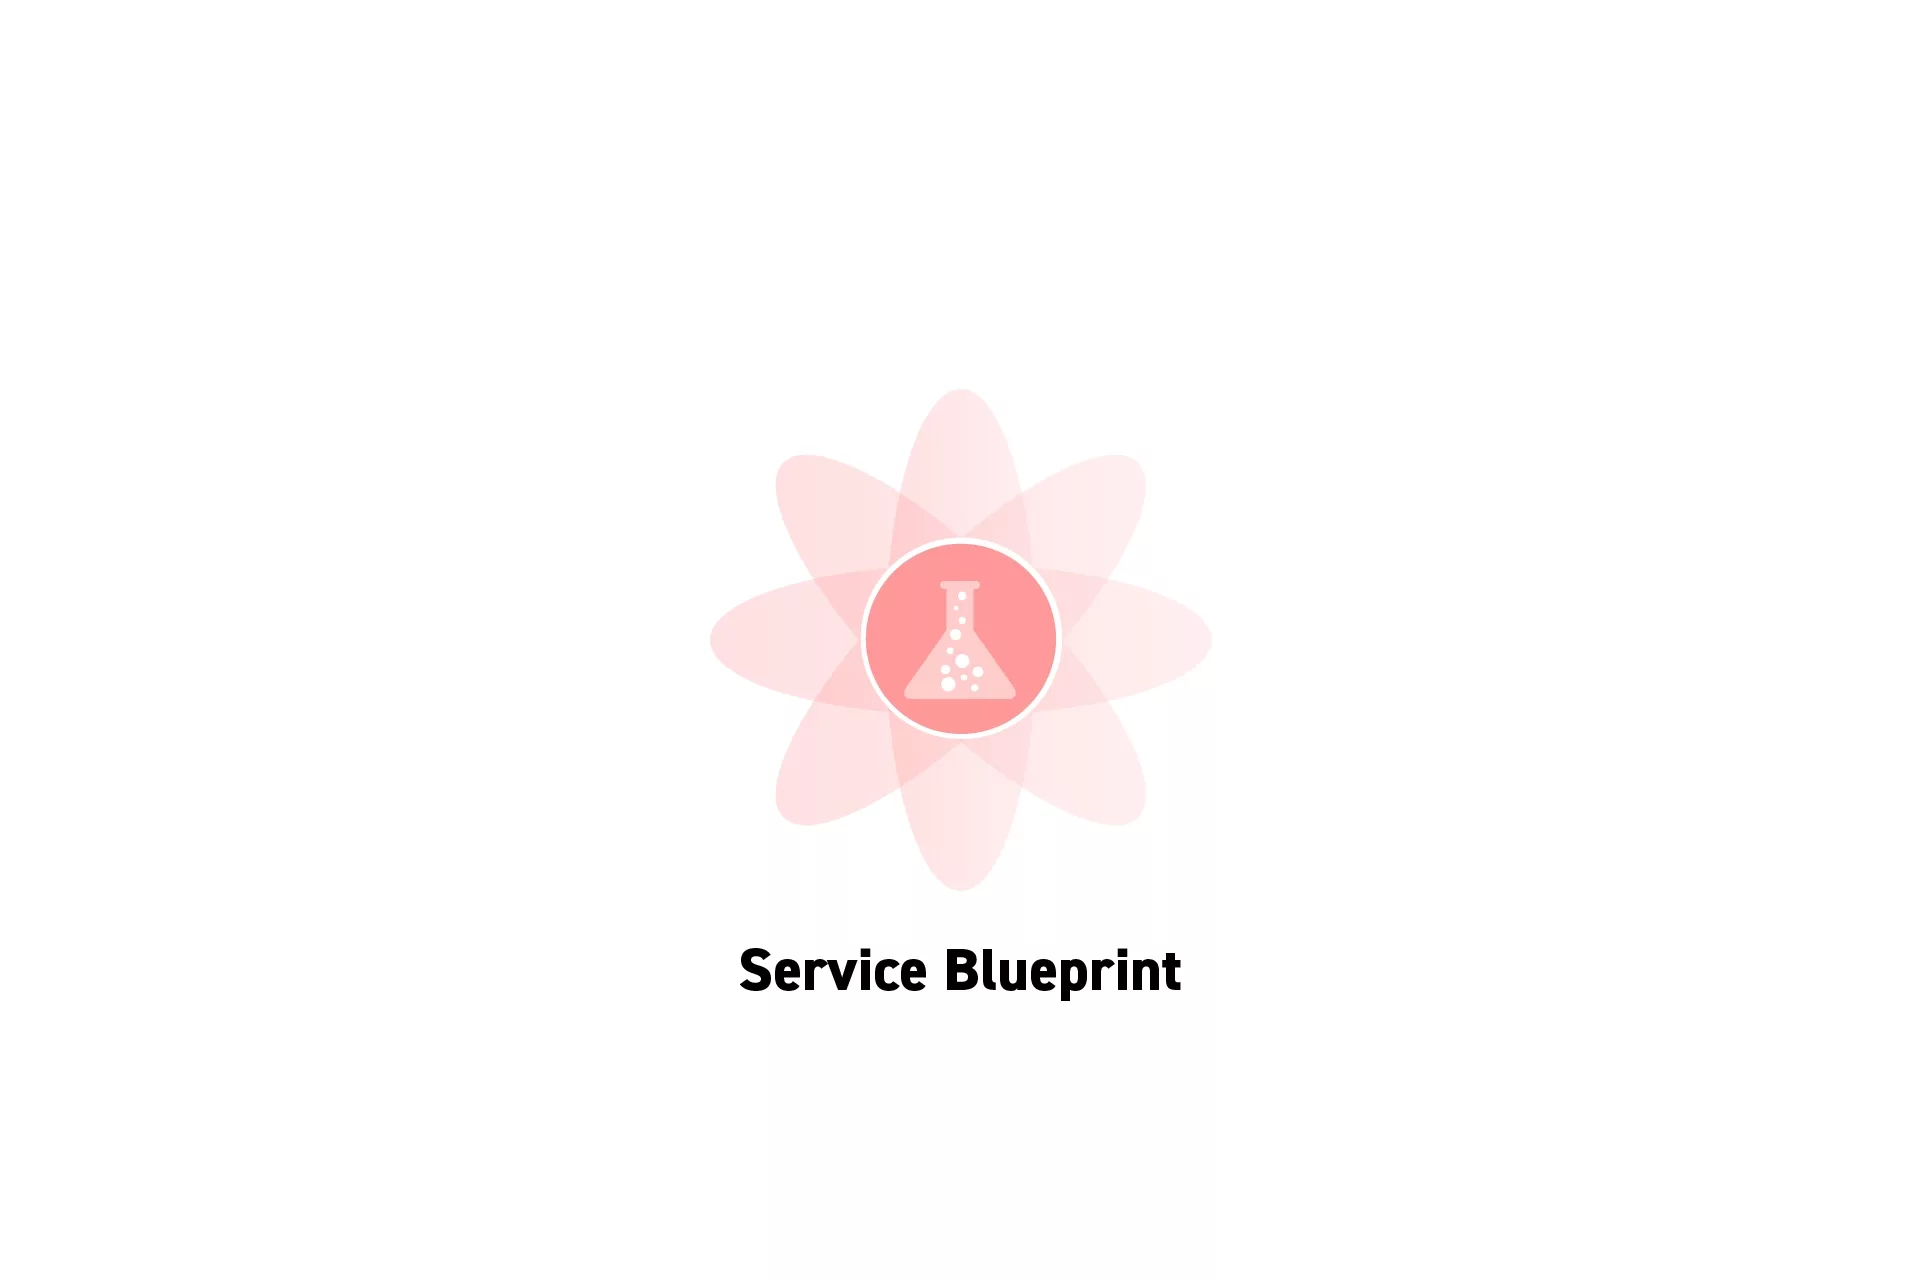 A flower that represents Strategy with the text “Service Blueprint” beneath it.